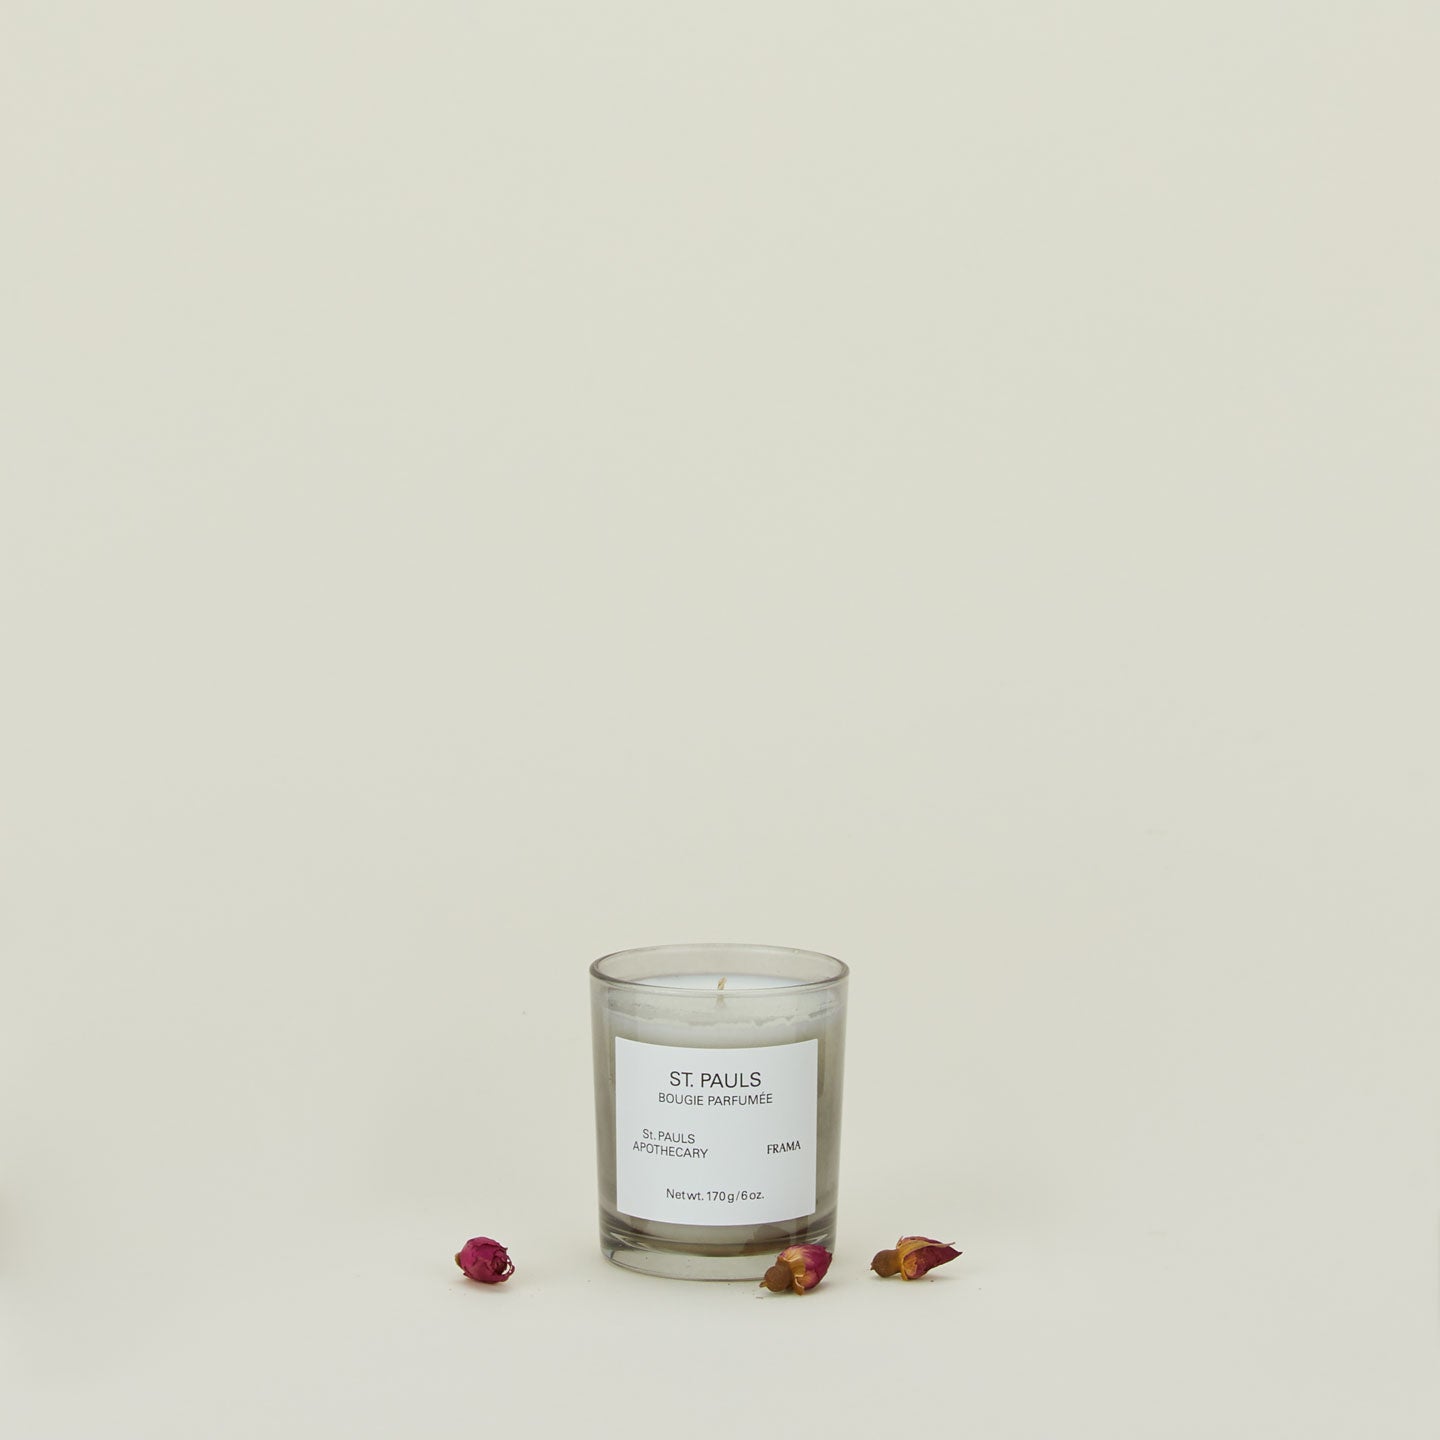 A wax candle with the scent St. Pauls, with dried florals.